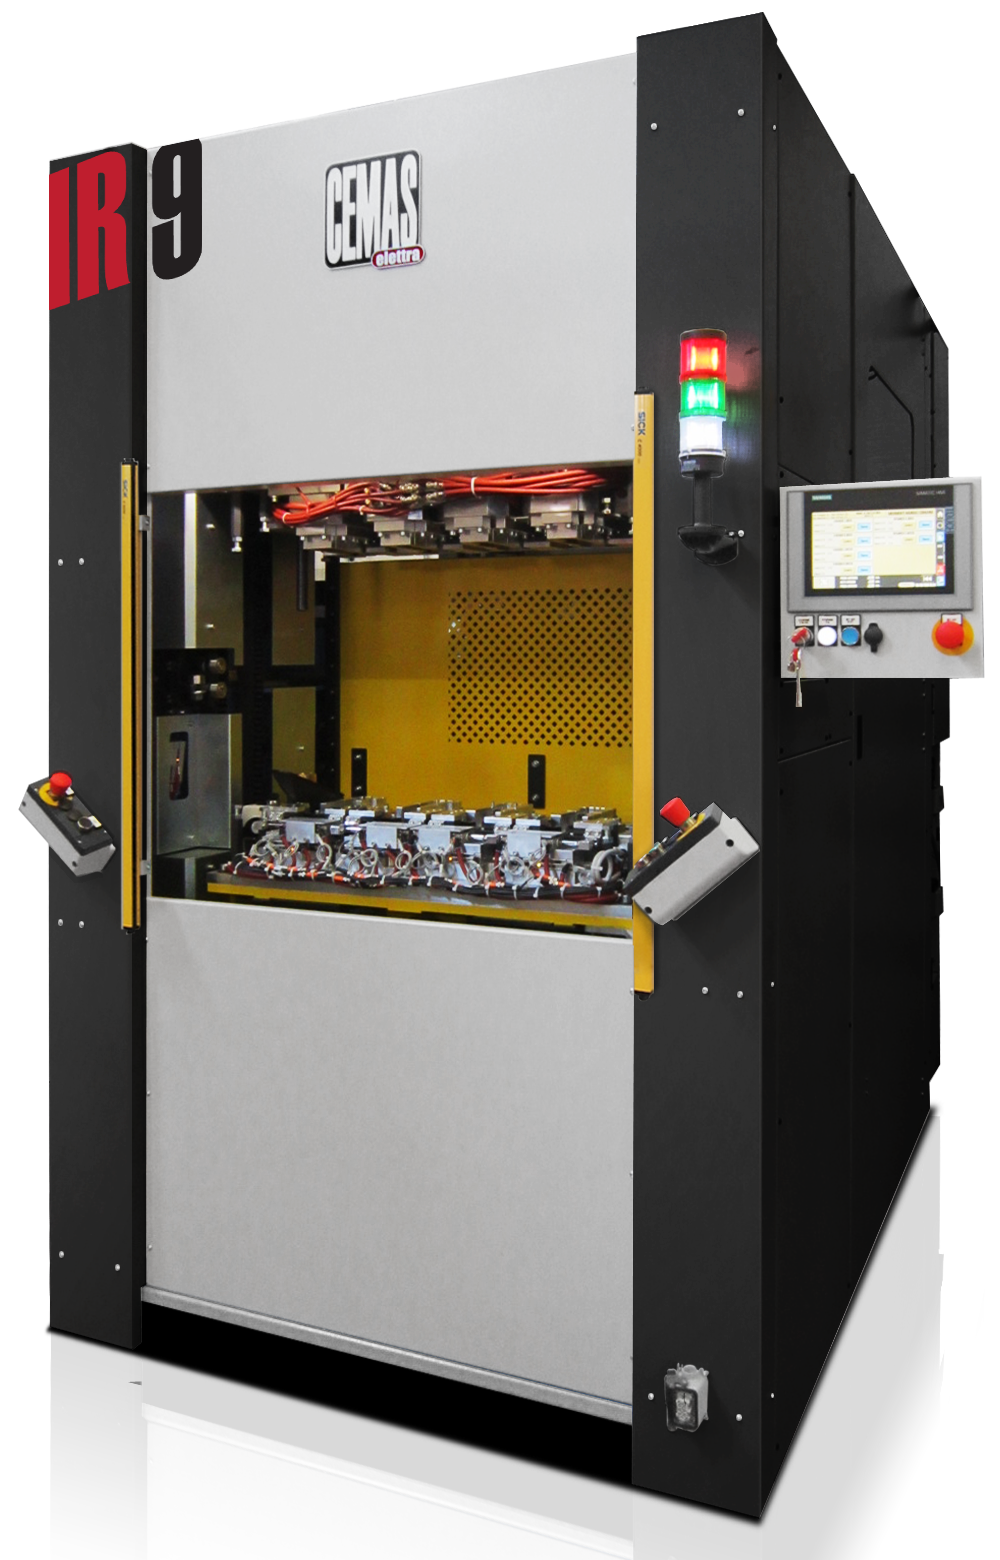 Suppliers of High Performance Infrared Welding Machines UK